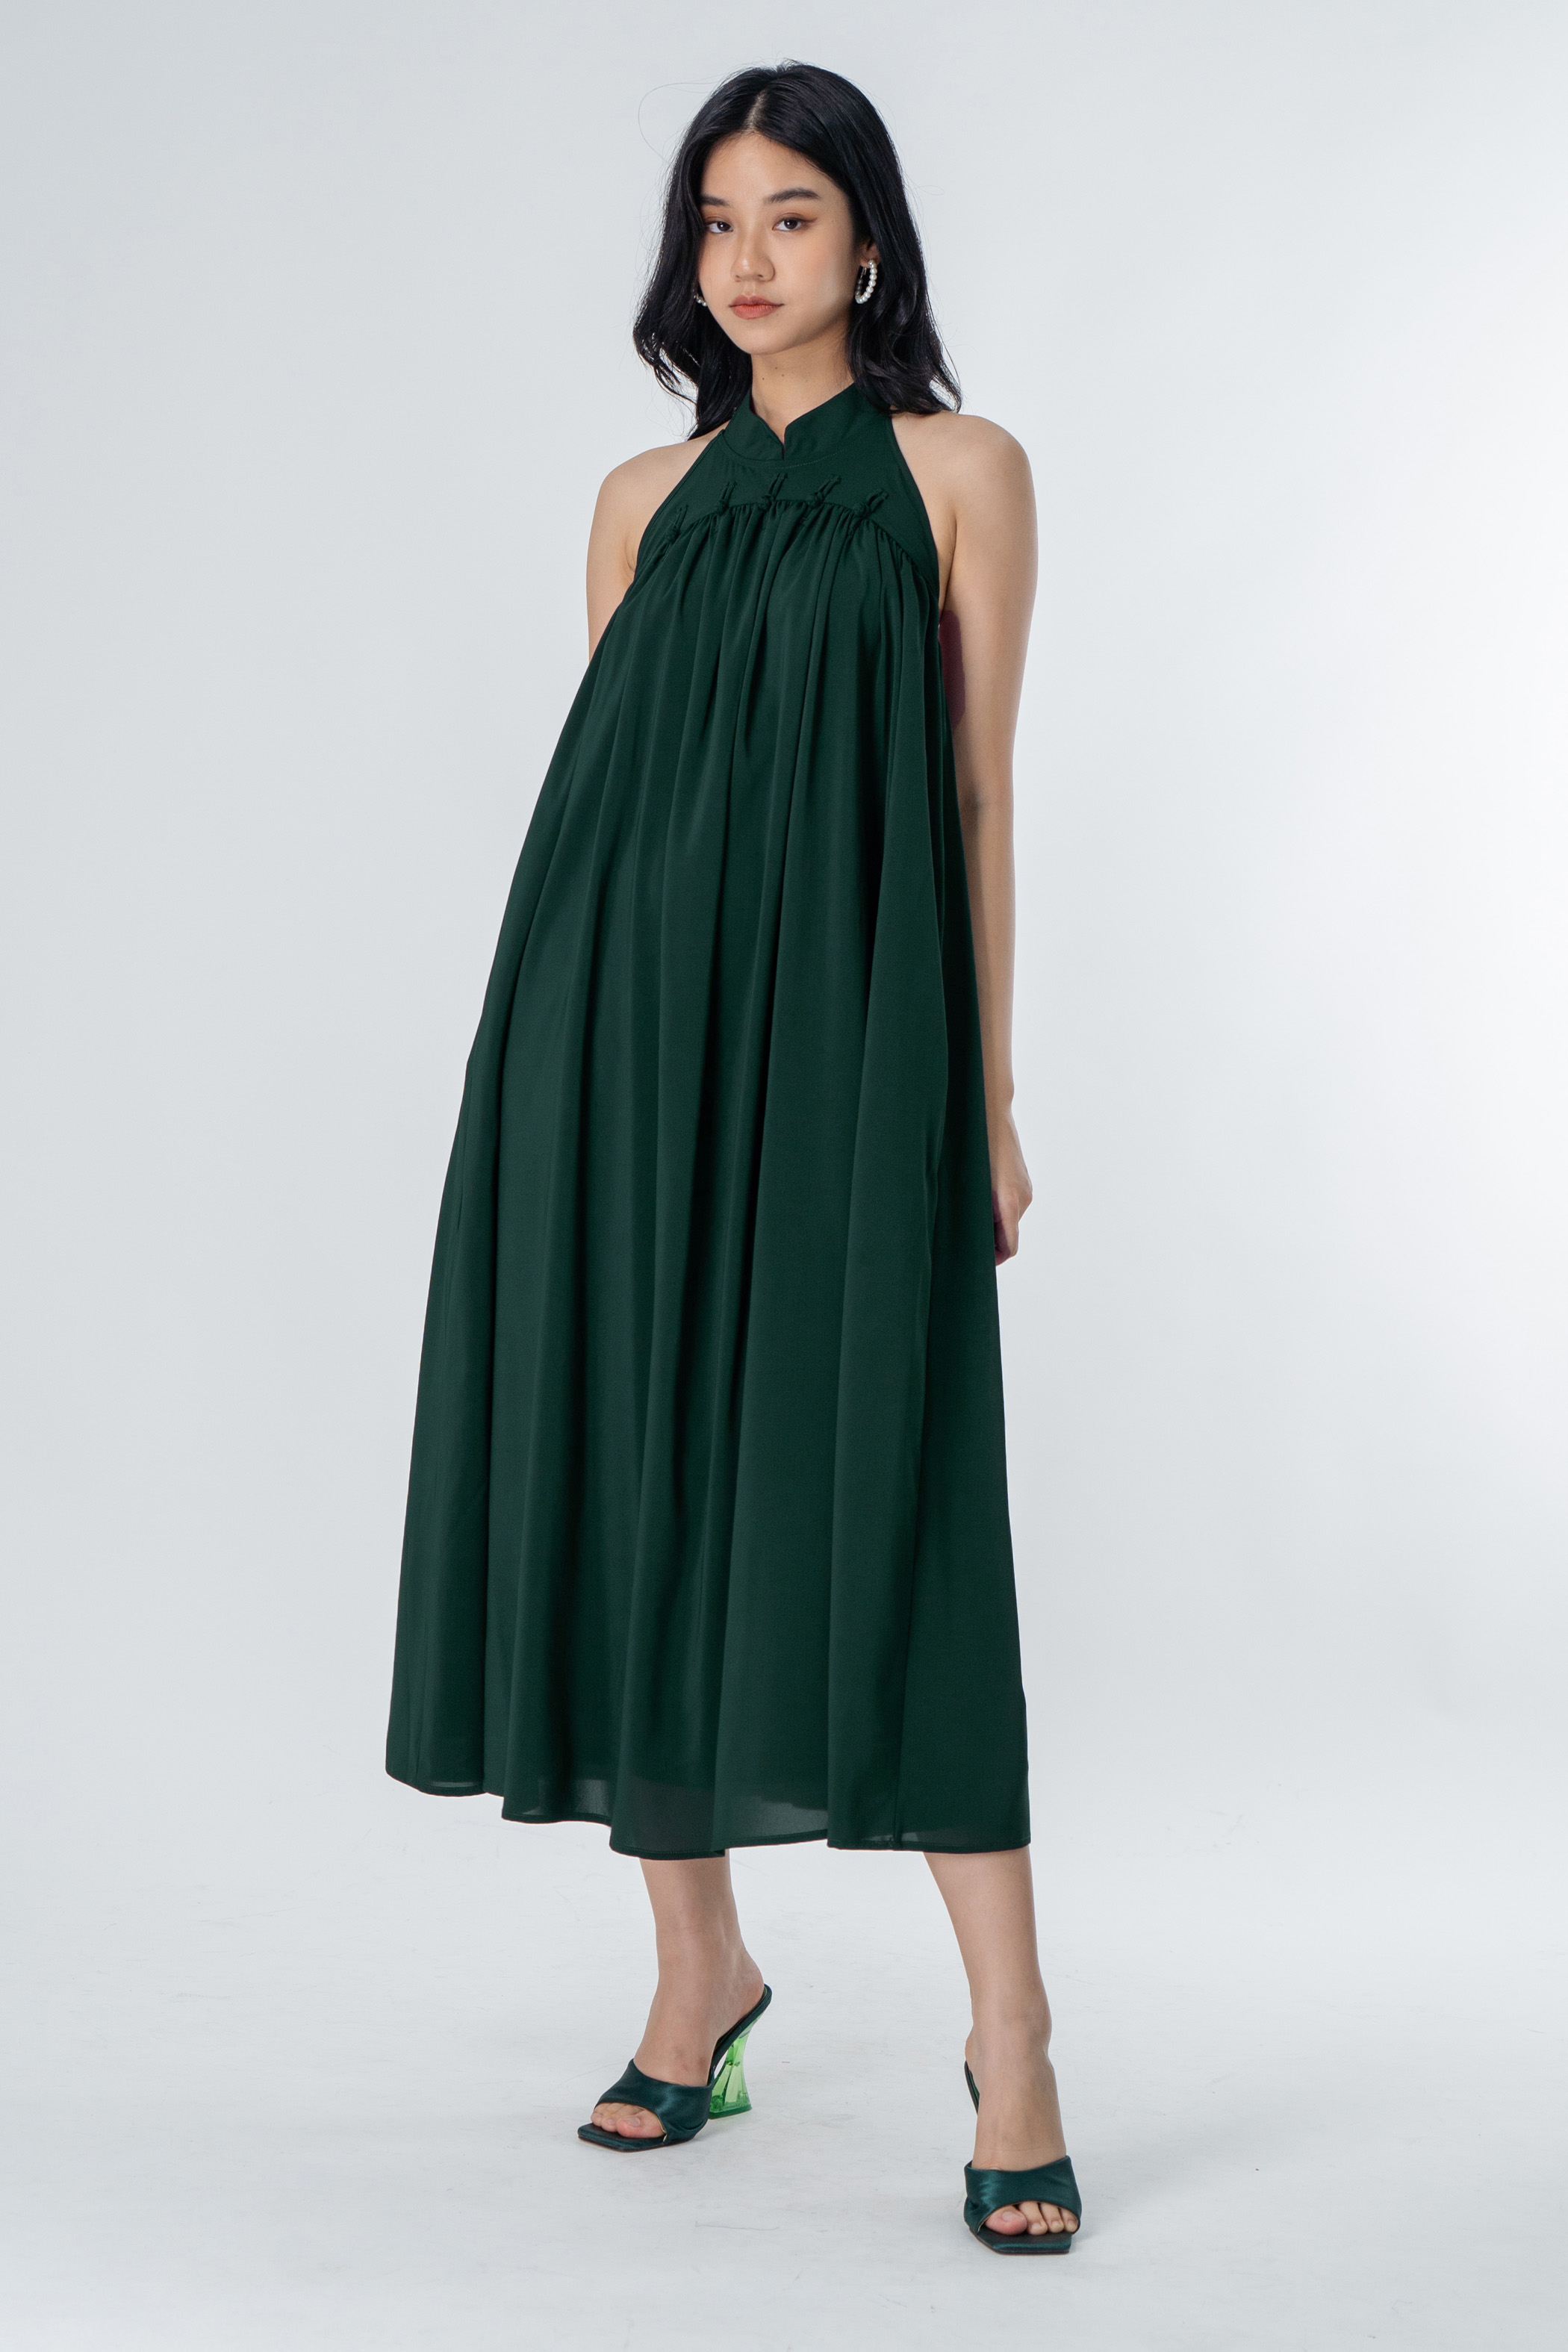 Wave Length Dress in Emerald | Young Hungry Free